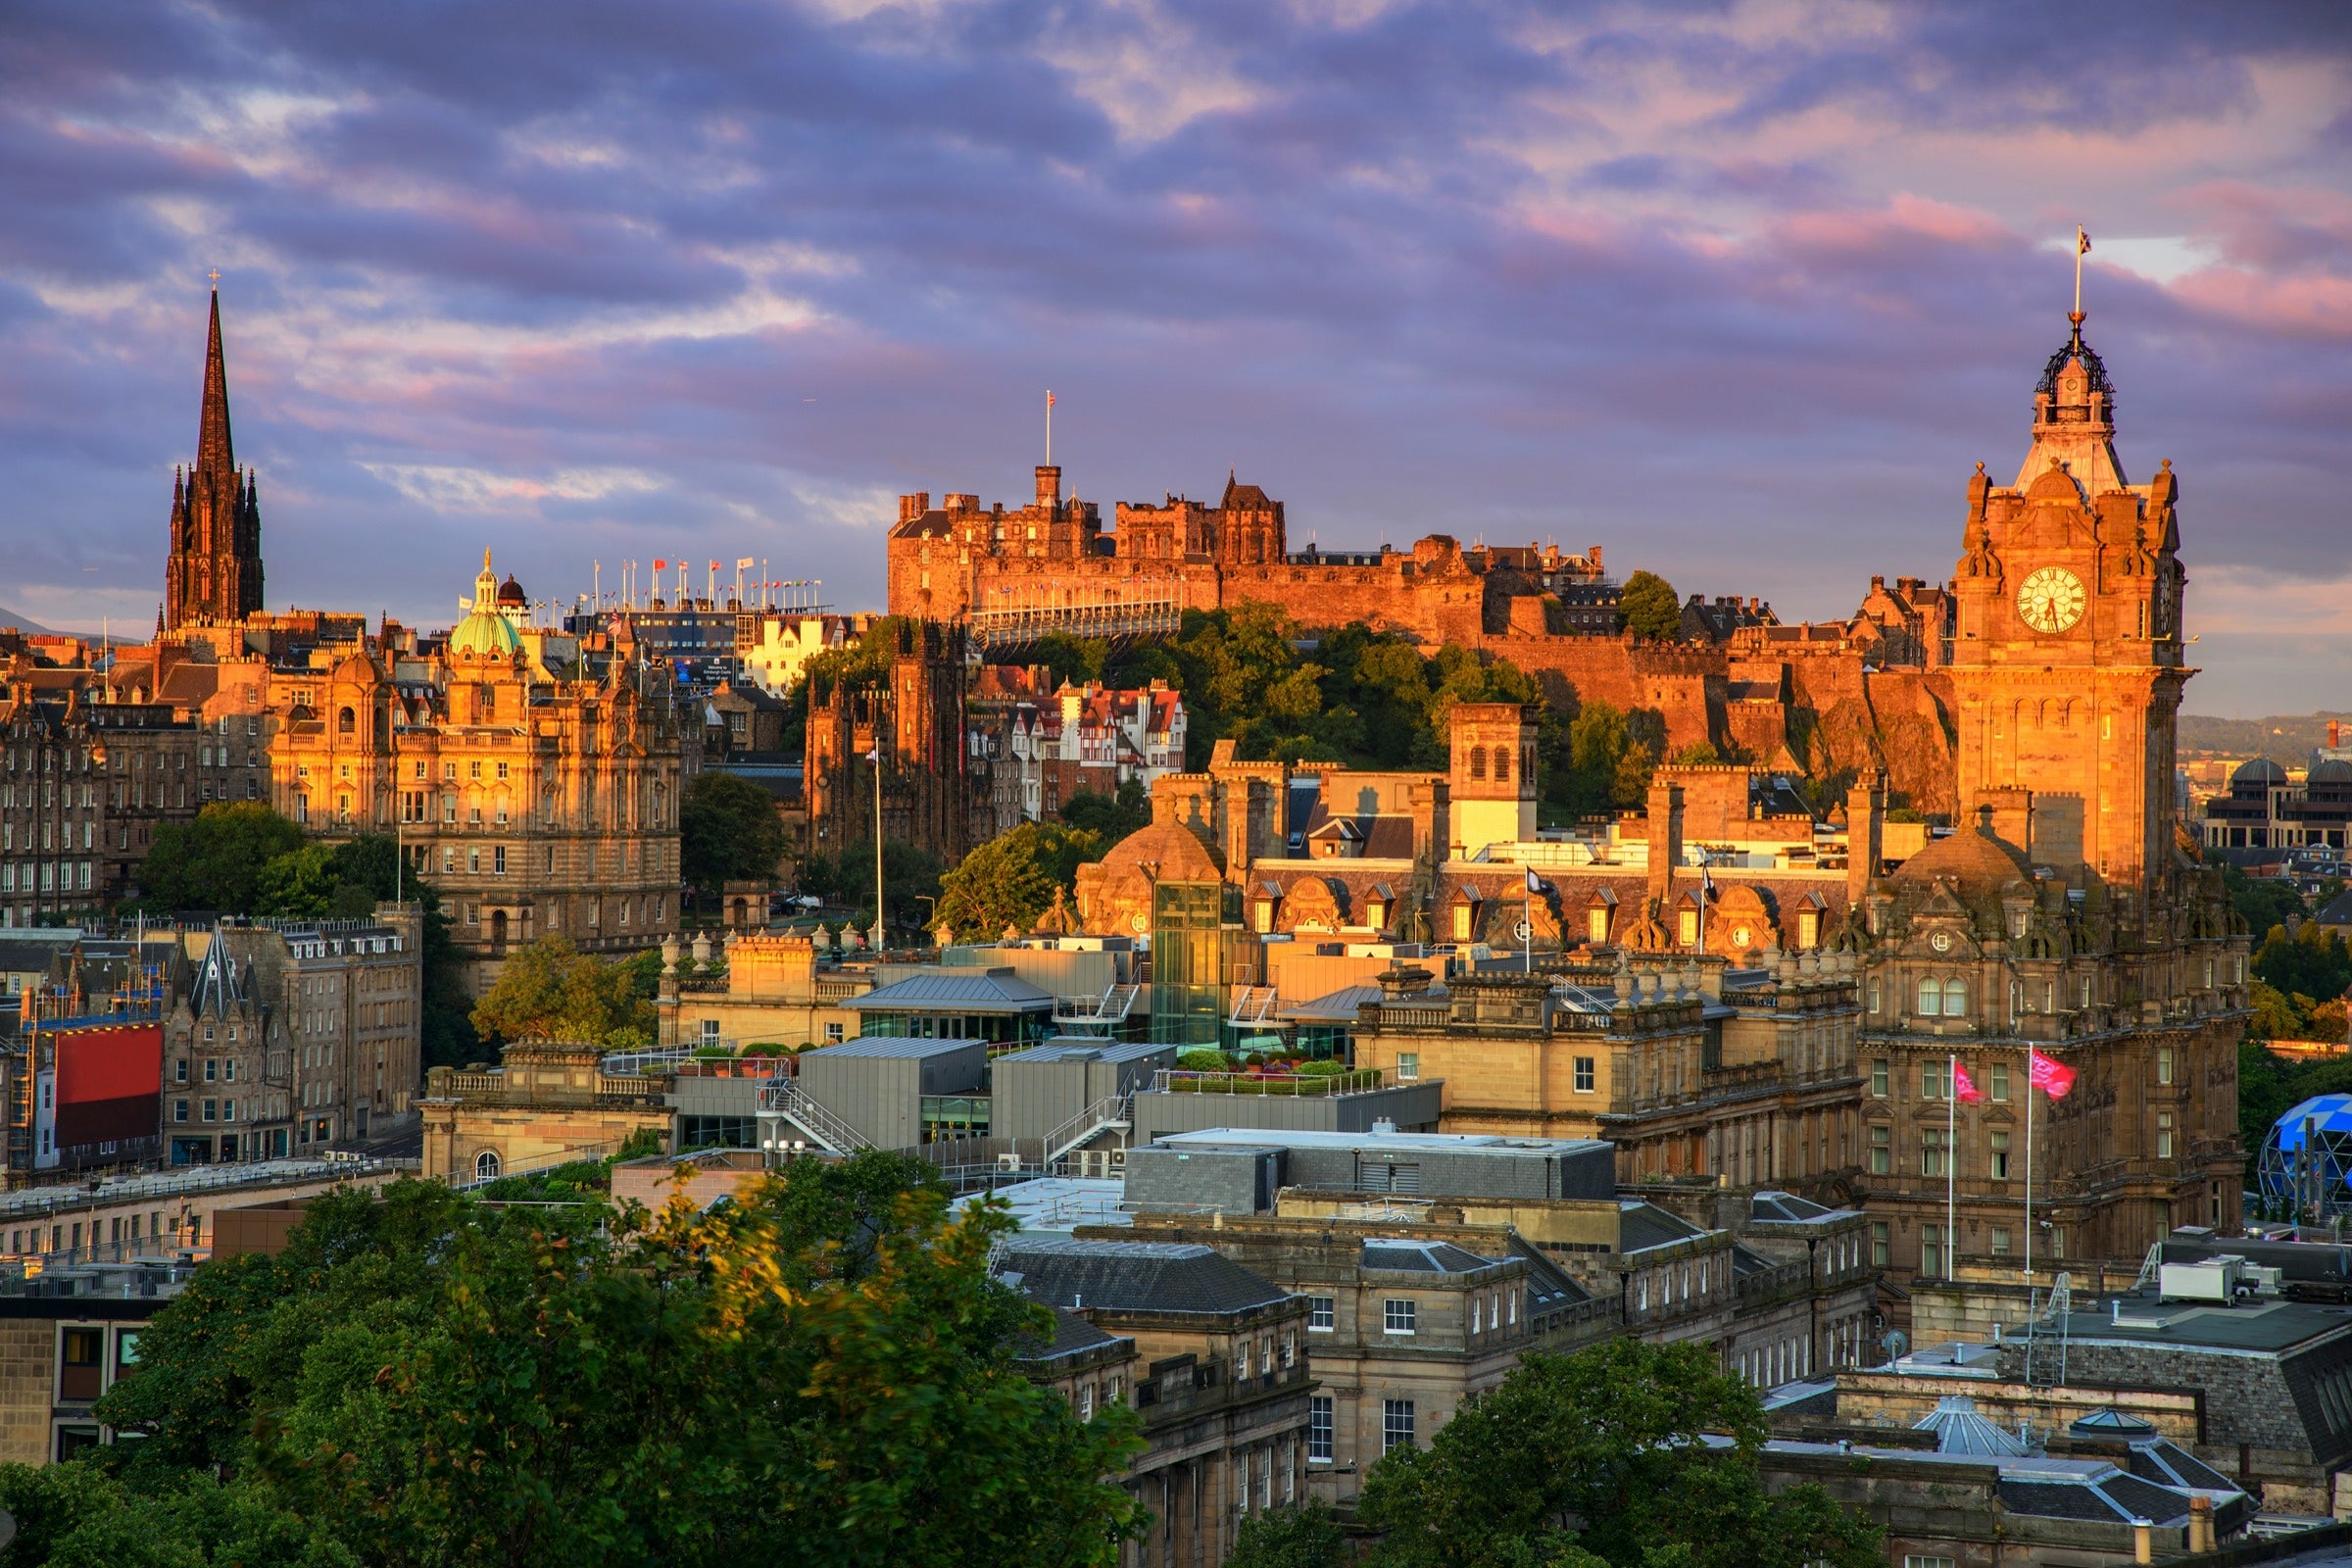 Round-trip fares from US cities to Edinburgh from $500 - The Points Guy